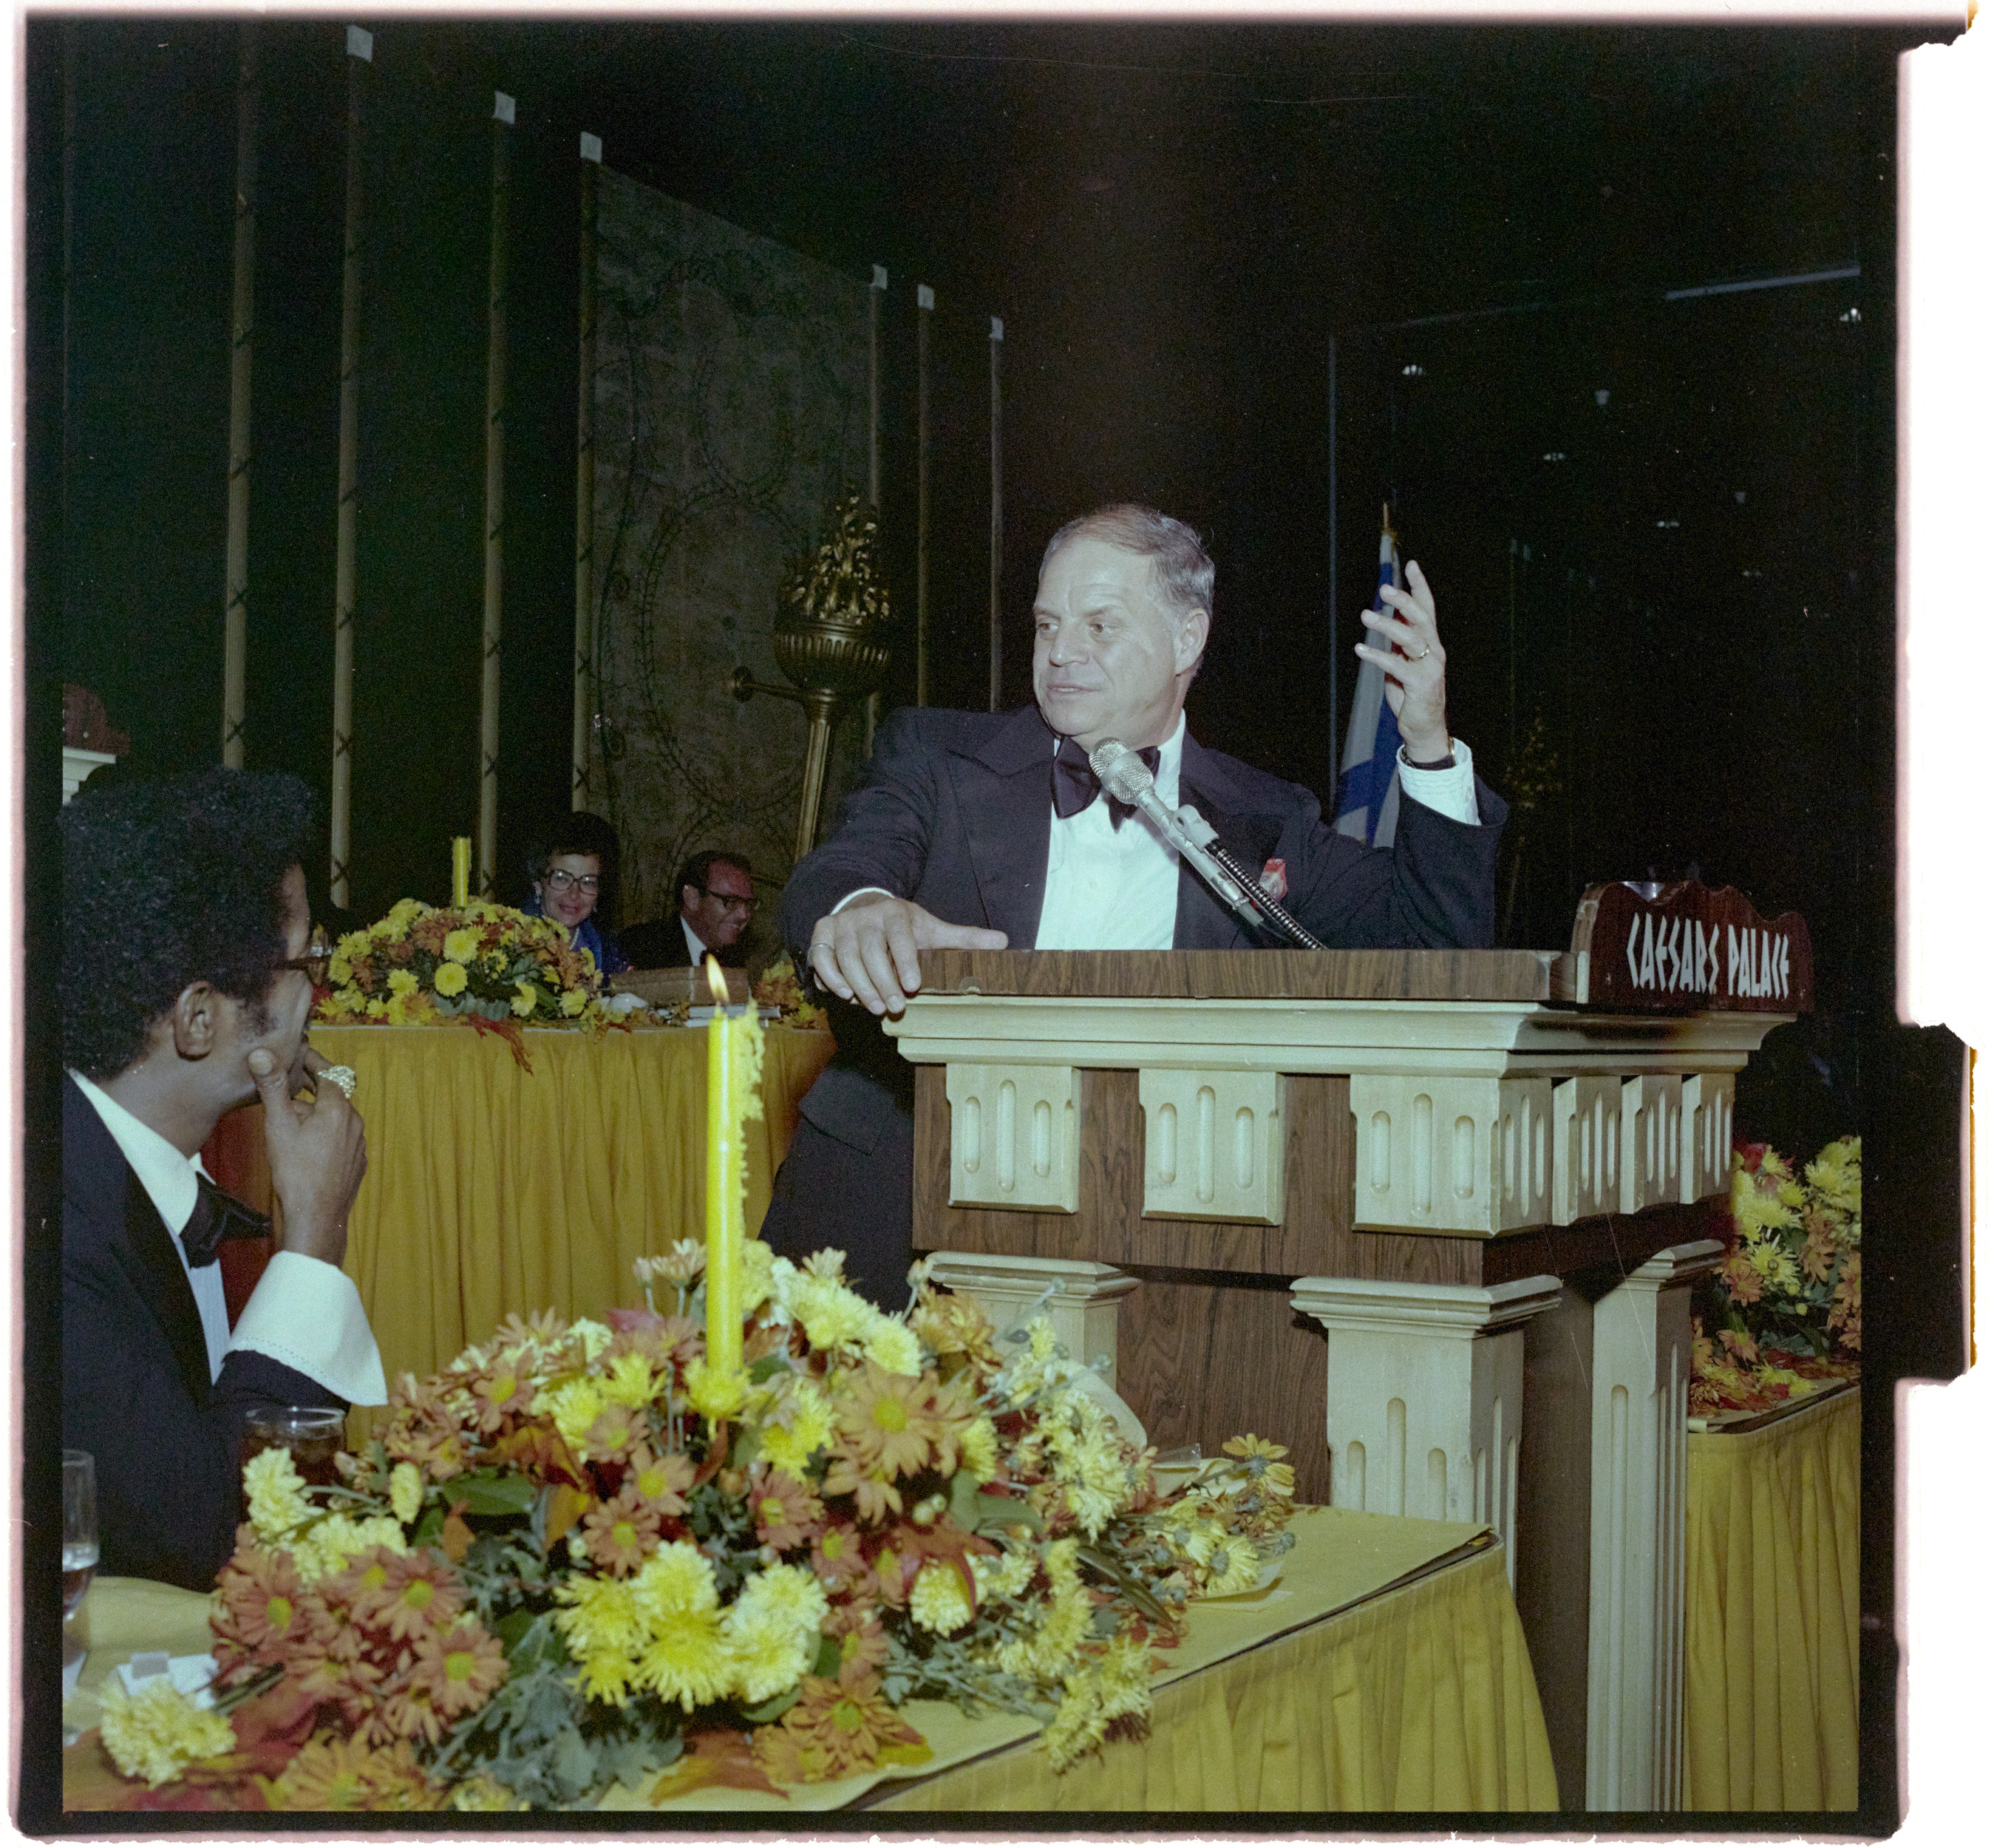 Photographs of Combined Jewish Appeal (Israel Bonds Dinner), image 15